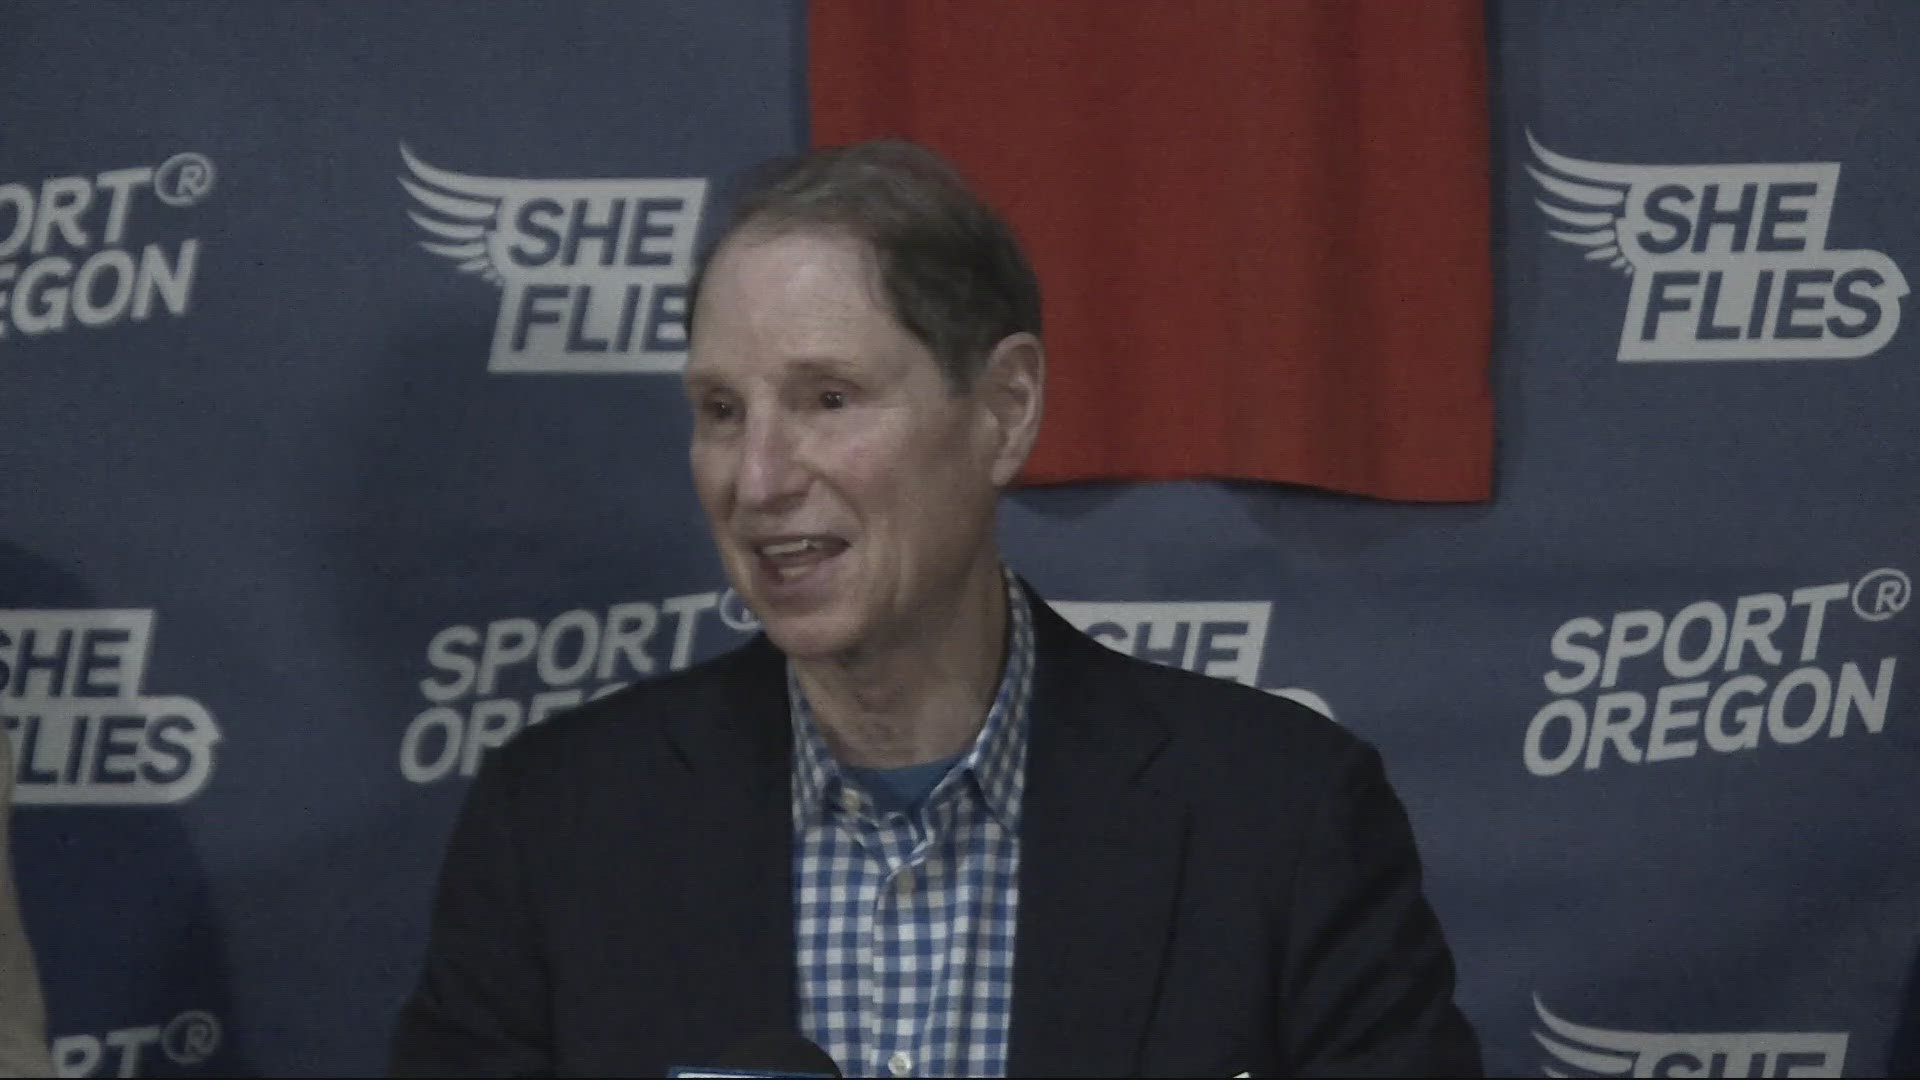 Sen. Ron Wyden joined 140 local businesses to draft a letter to WNBA commissioner Cathy Englebert in support of bringing an expansion team to the Rose City.